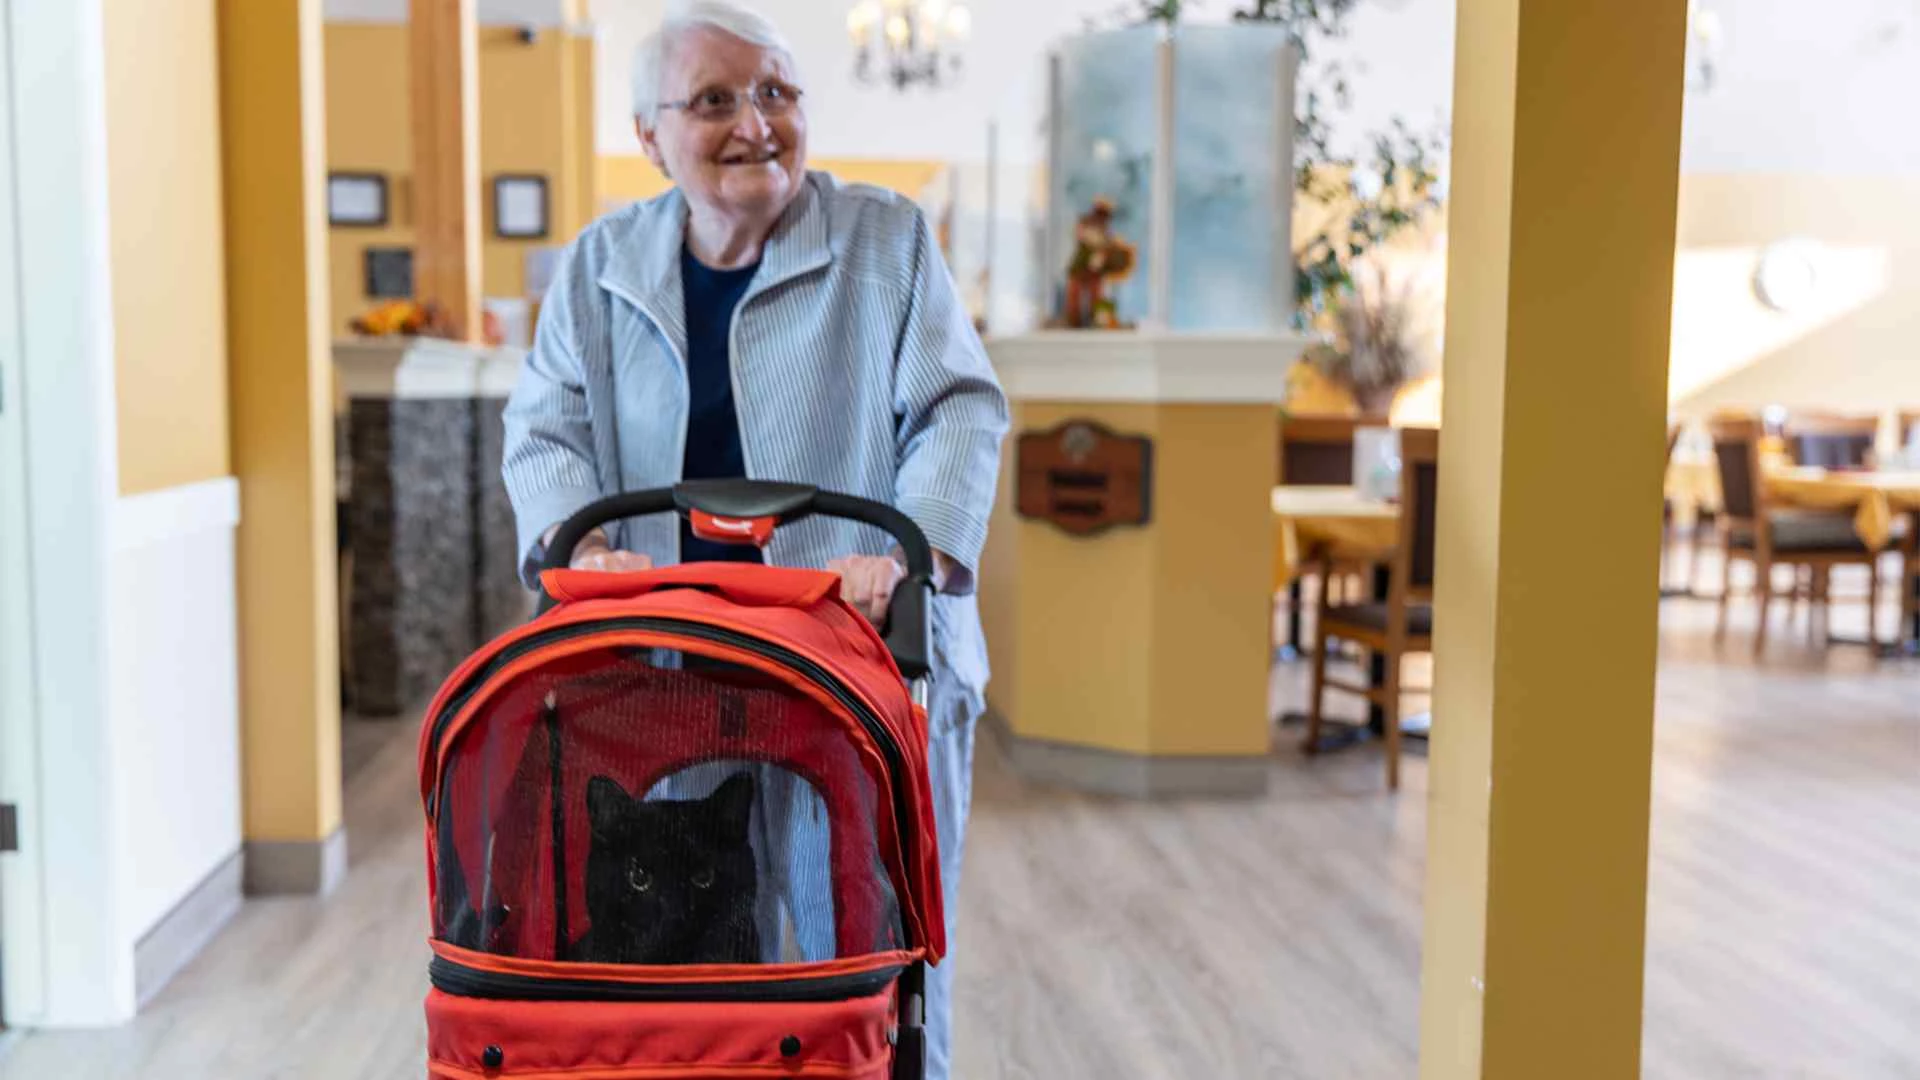 An elderly lady with a black cat